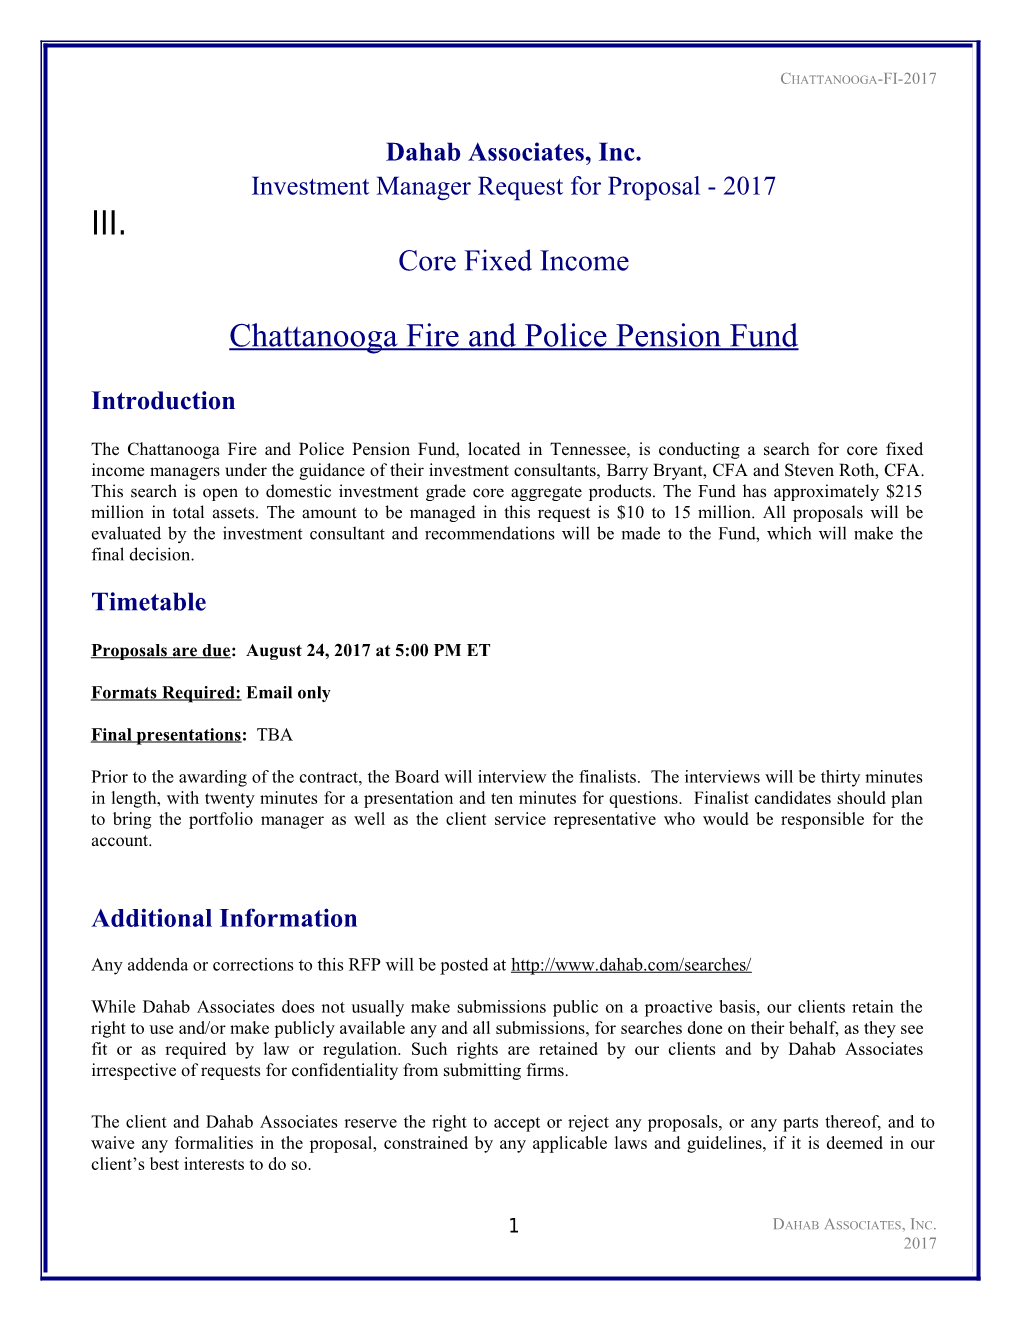 Investment Manager Request for Proposal - 2017